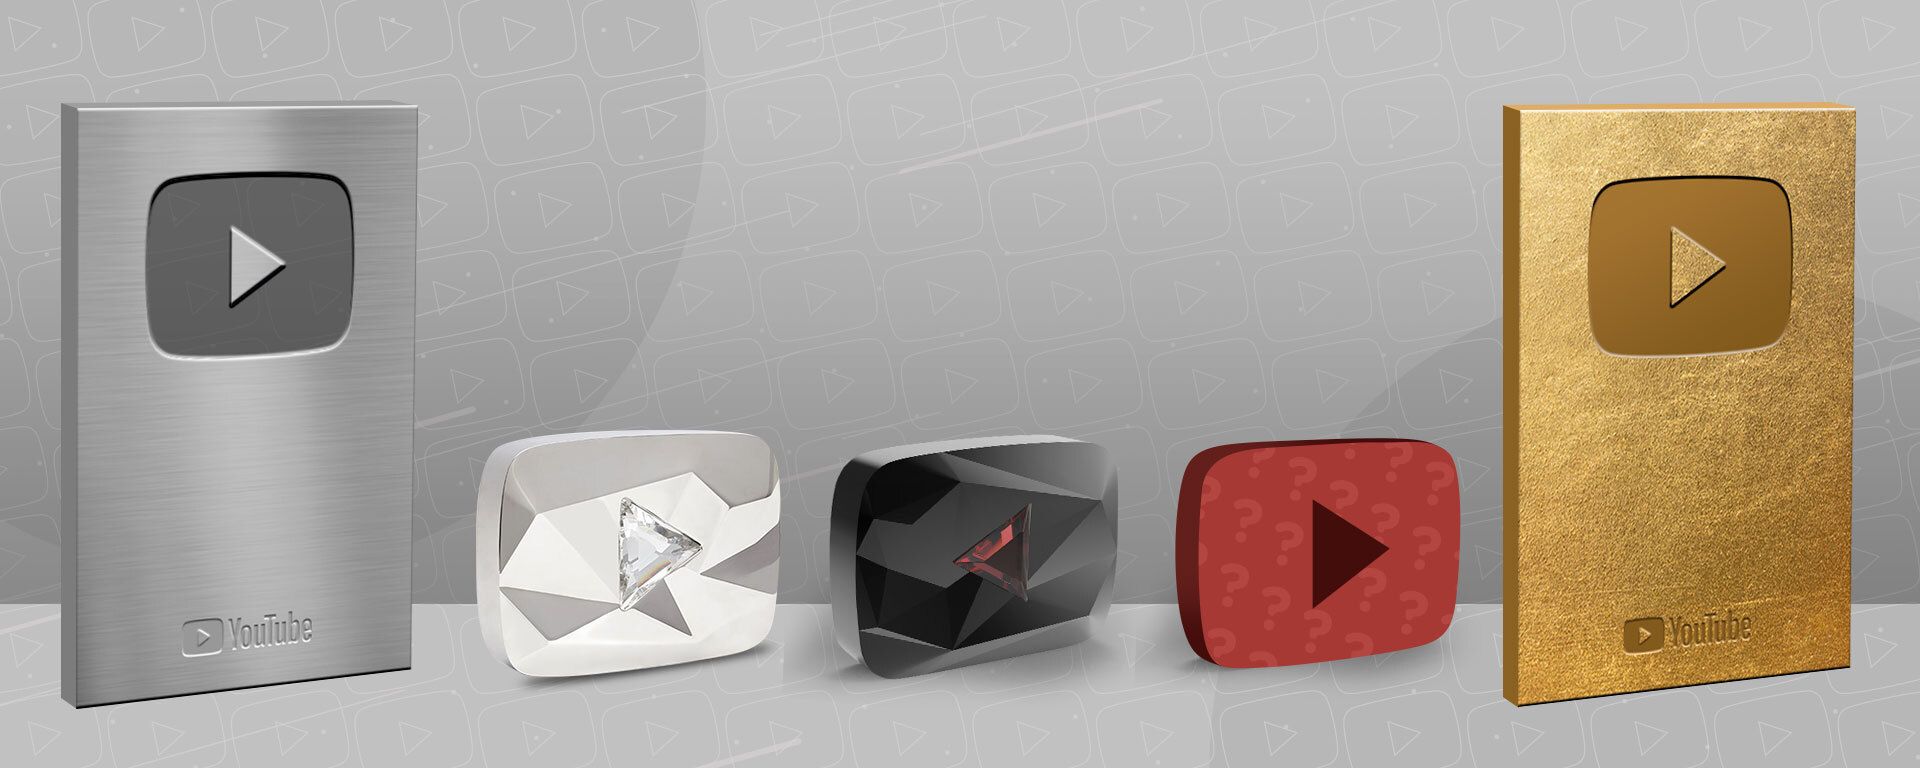 Images of each of the available YouTube Play Buttons.